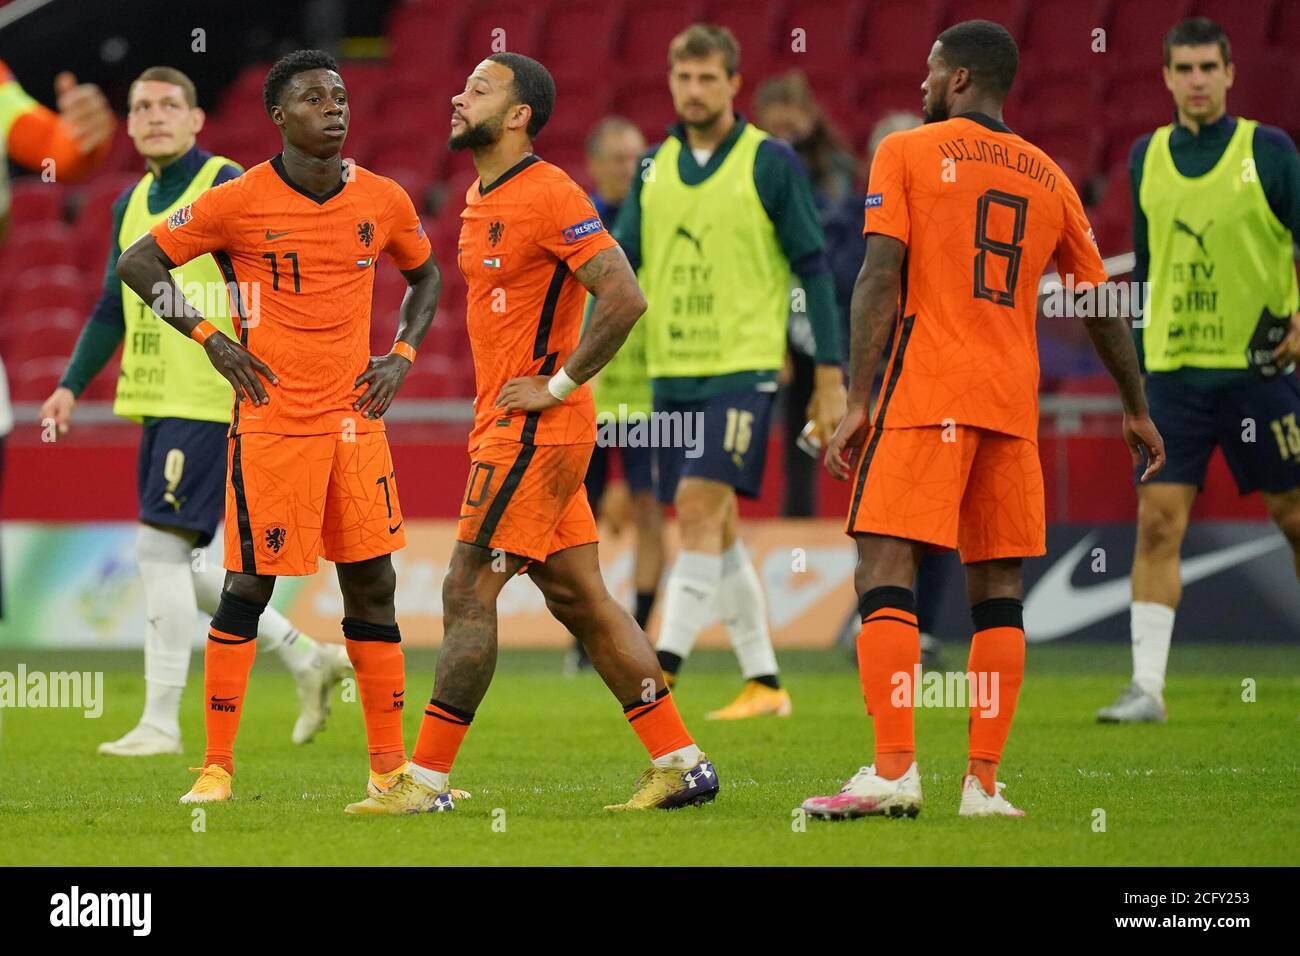 Memphis Depay (Netherlands)during the UEFA Nations League 2020-2021 match  between Netherlands 0-1 Italy at Amsterdam Arena on September 07, 2020 in  Amsterdam, Netherlands. Credit: Maurizio Borsari/AFLO/Alamy Live News Stock  Photo - Alamy